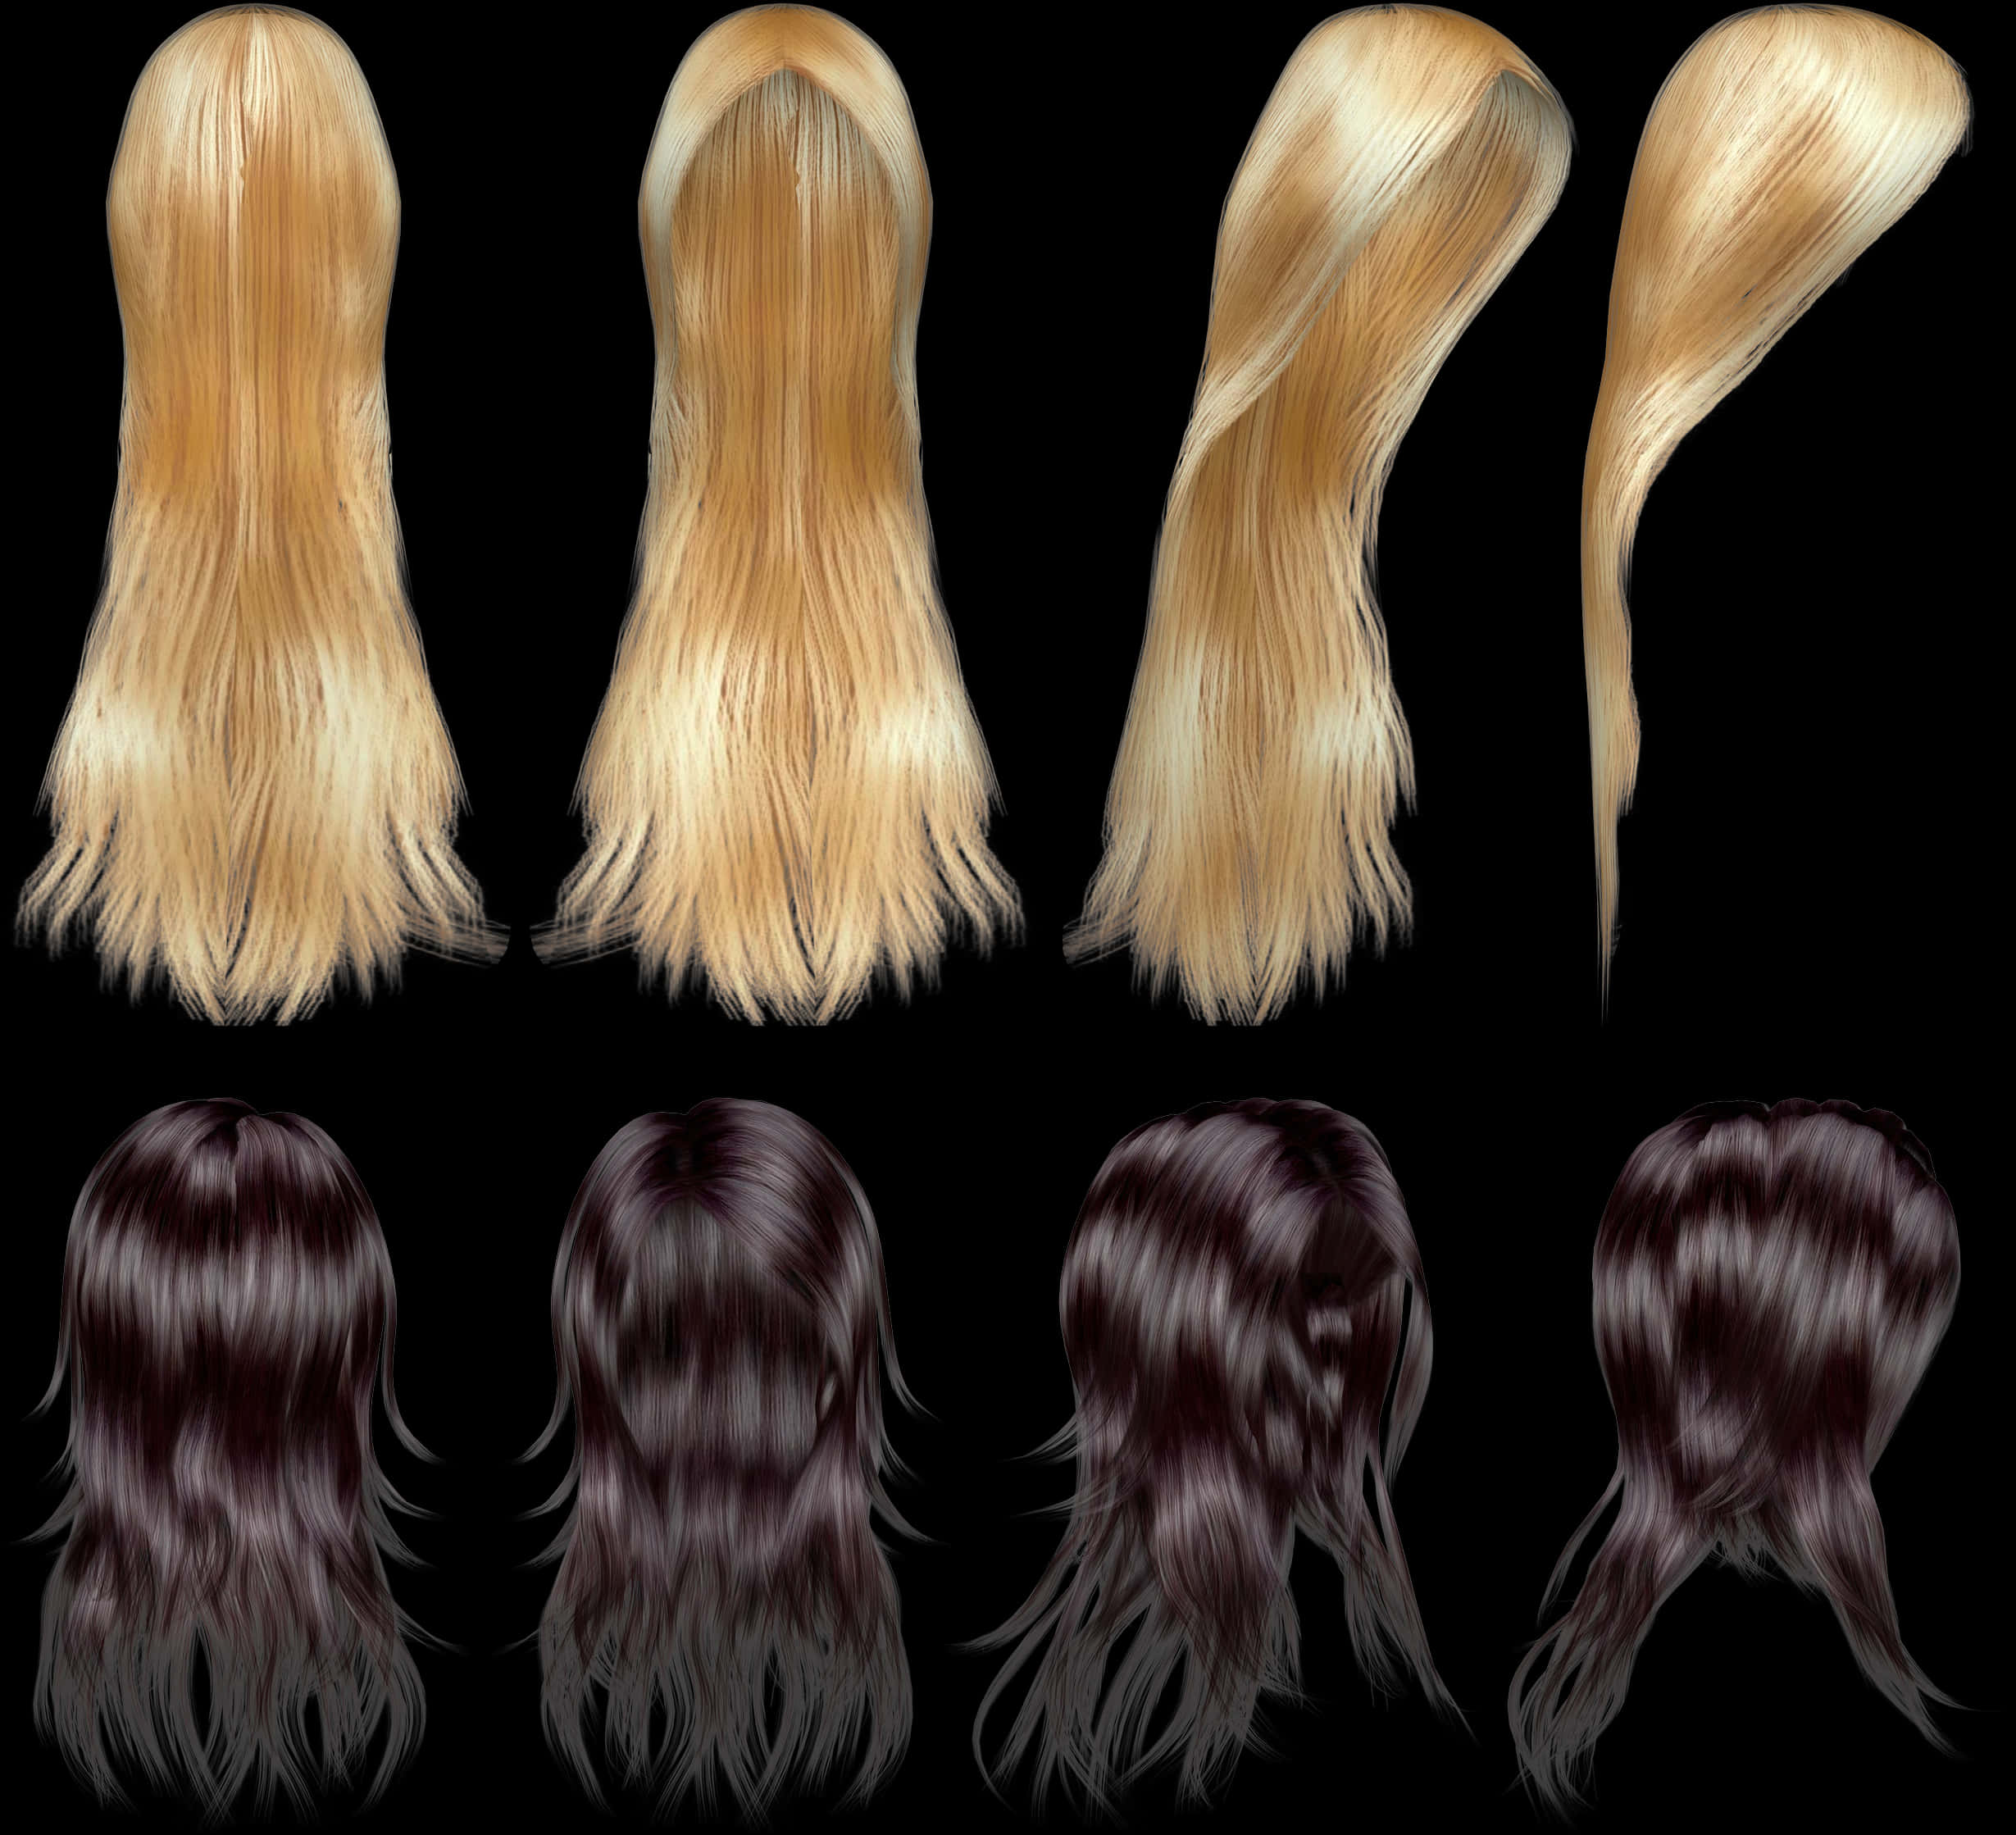 A Different Hair Styles Of Different Colors